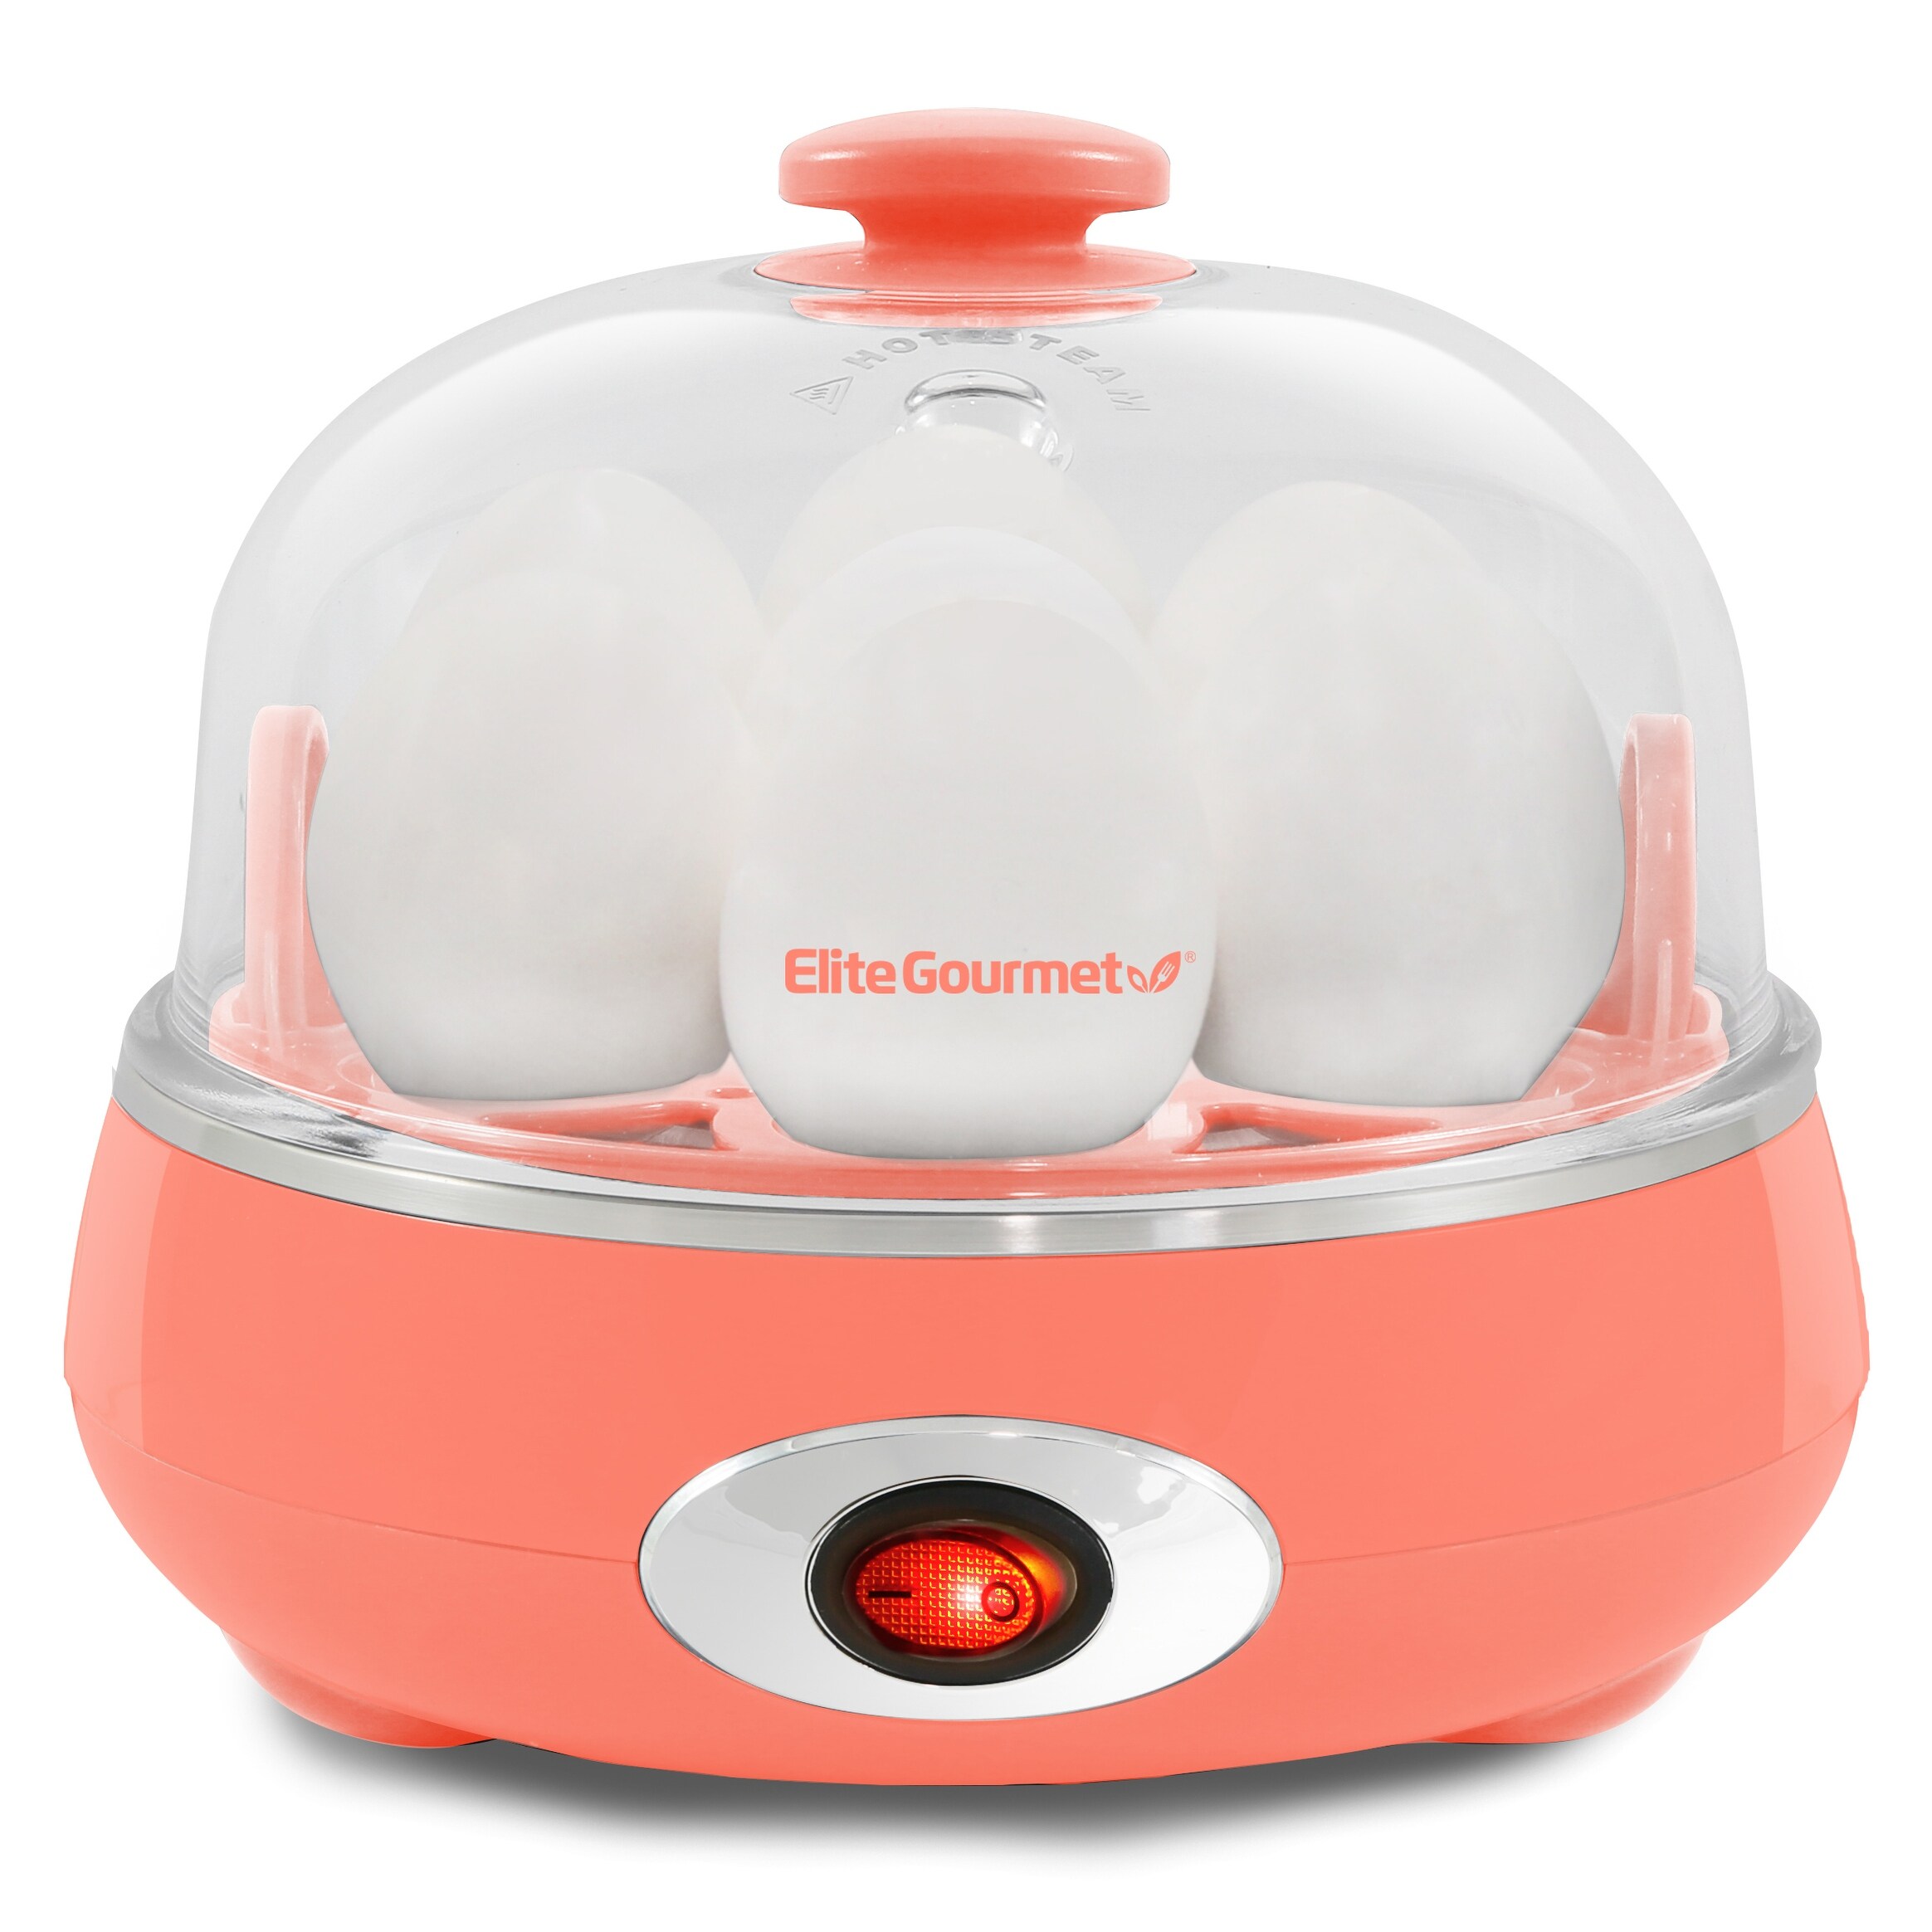 https://ak1.ostkcdn.com/images/products/is/images/direct/fc1153d3a473a62c5447d3e0569fc60472998187/Elite-Gourmet-Automatic-Easy-Egg-Cooker%2C-7-Eggs%2C-Coral.jpg